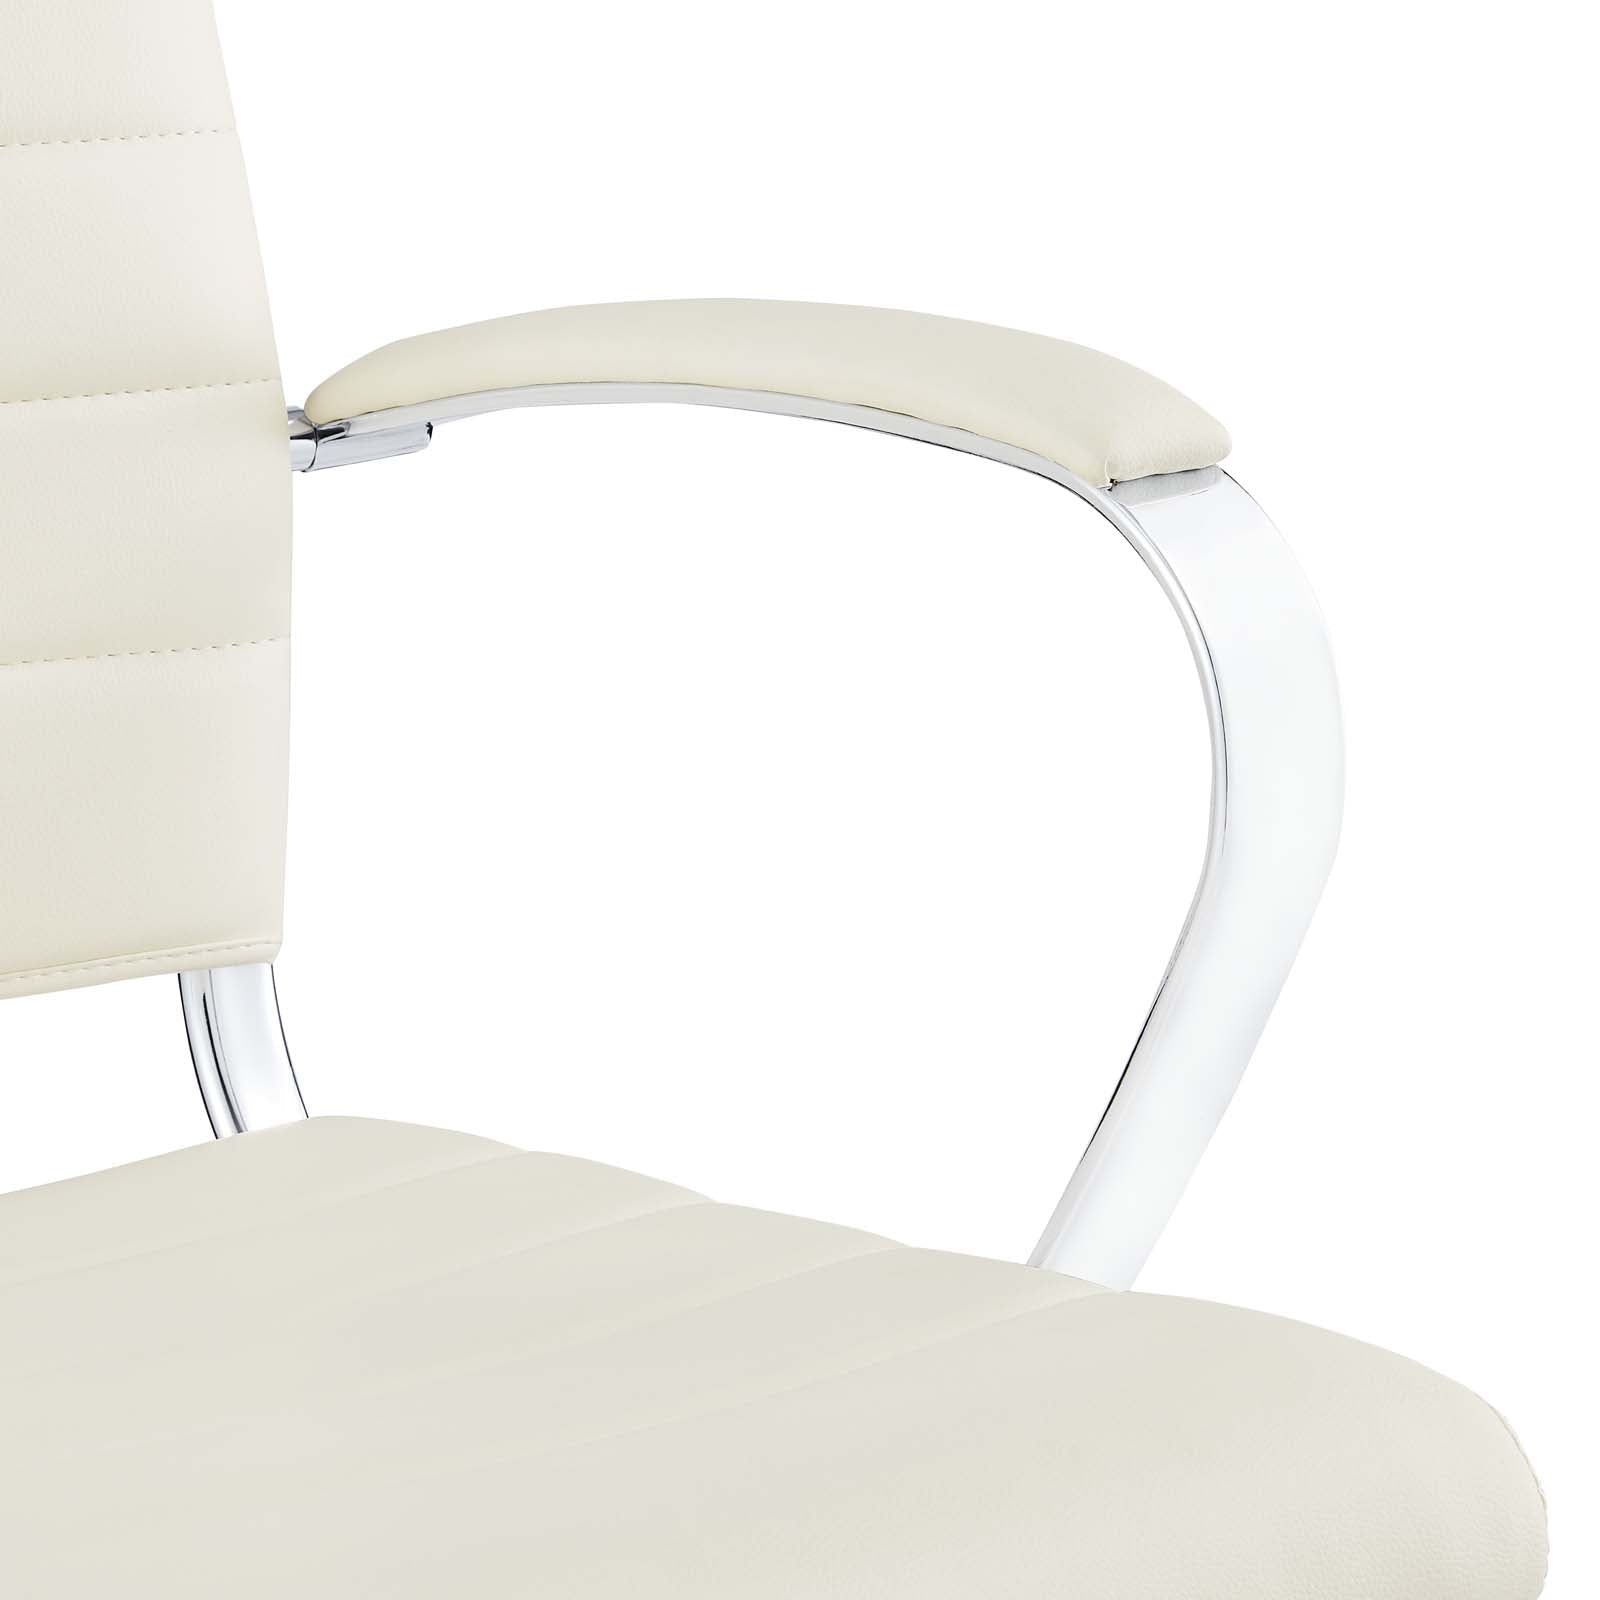 Deluxe Mid Back Office Chair